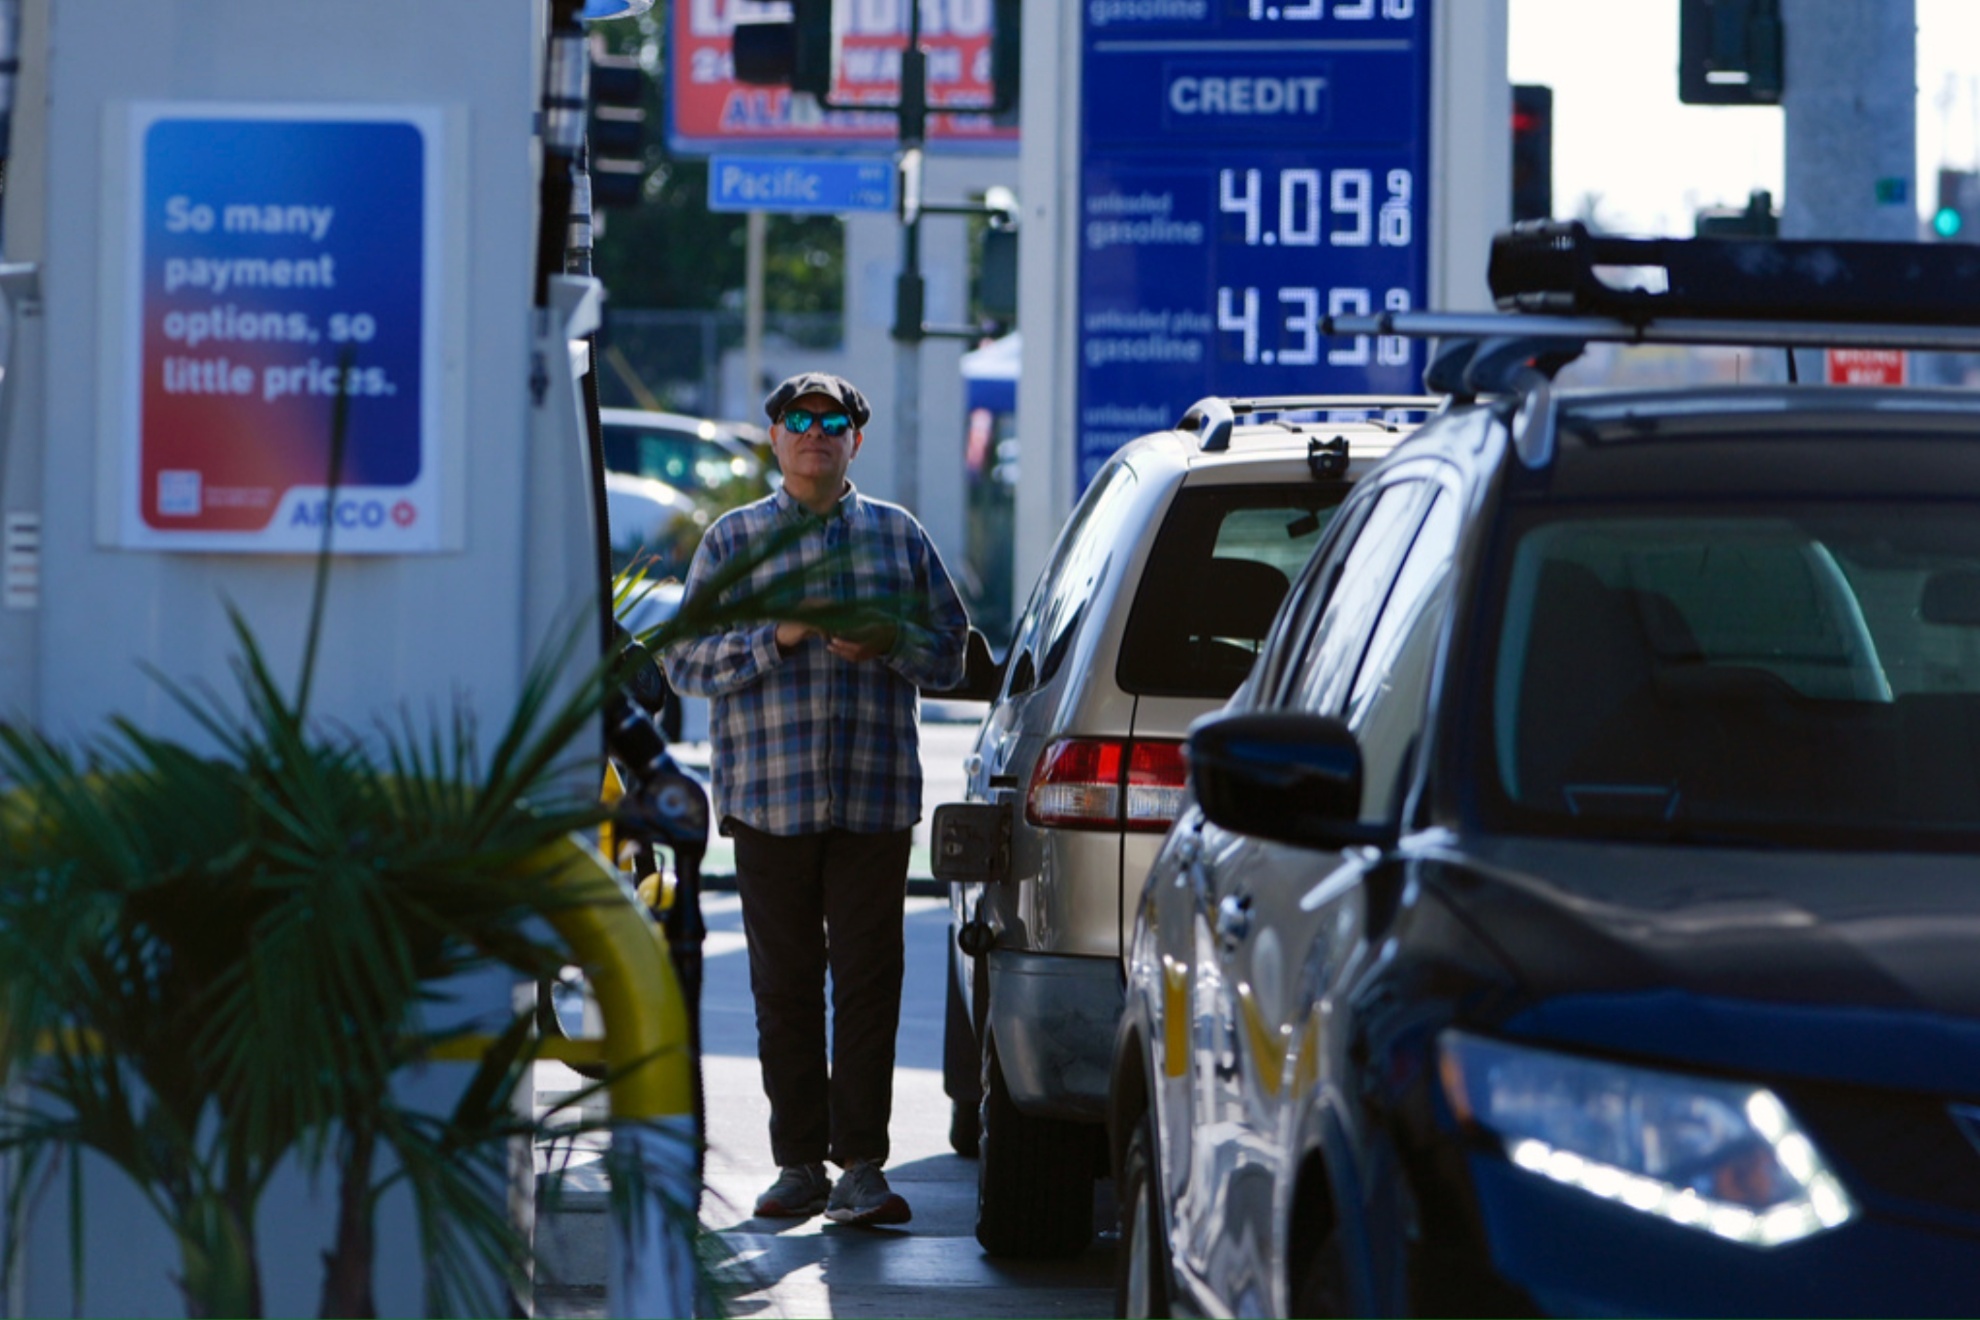 A new California tax increase will affect drivers at the gas pump